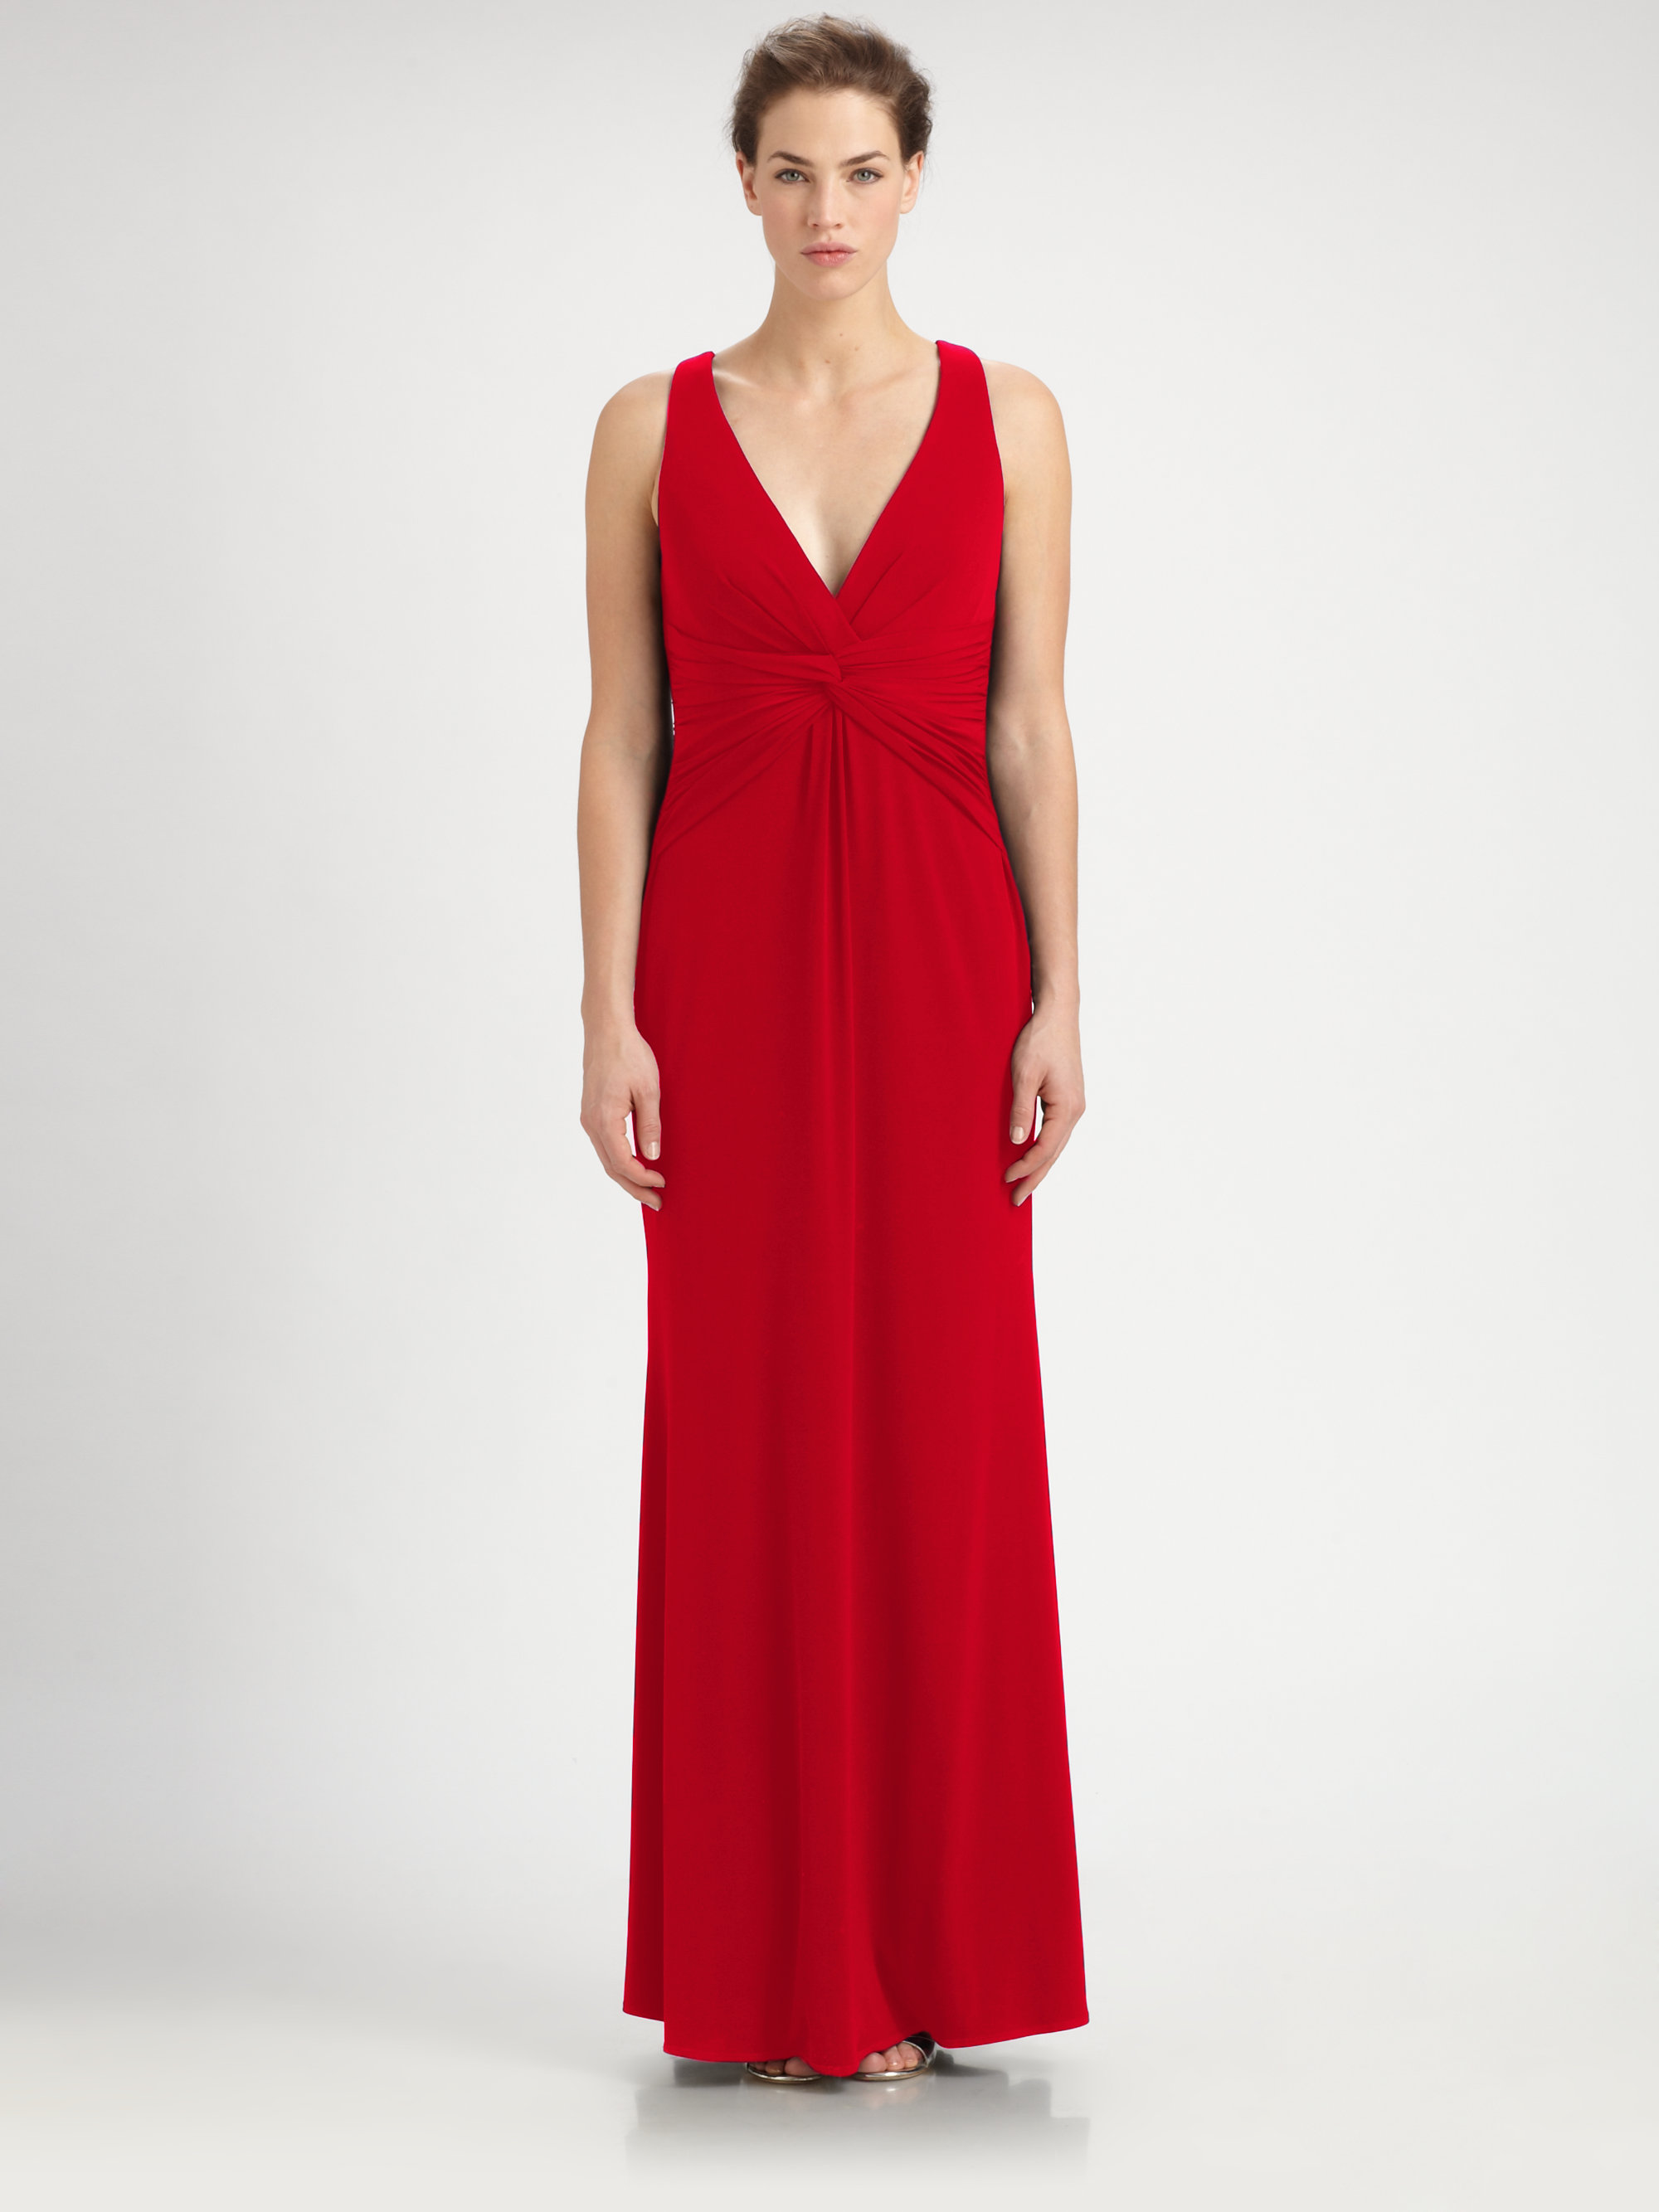 Laundry by shelli segal Halter Jersey Gown in Red (risque) | Lyst